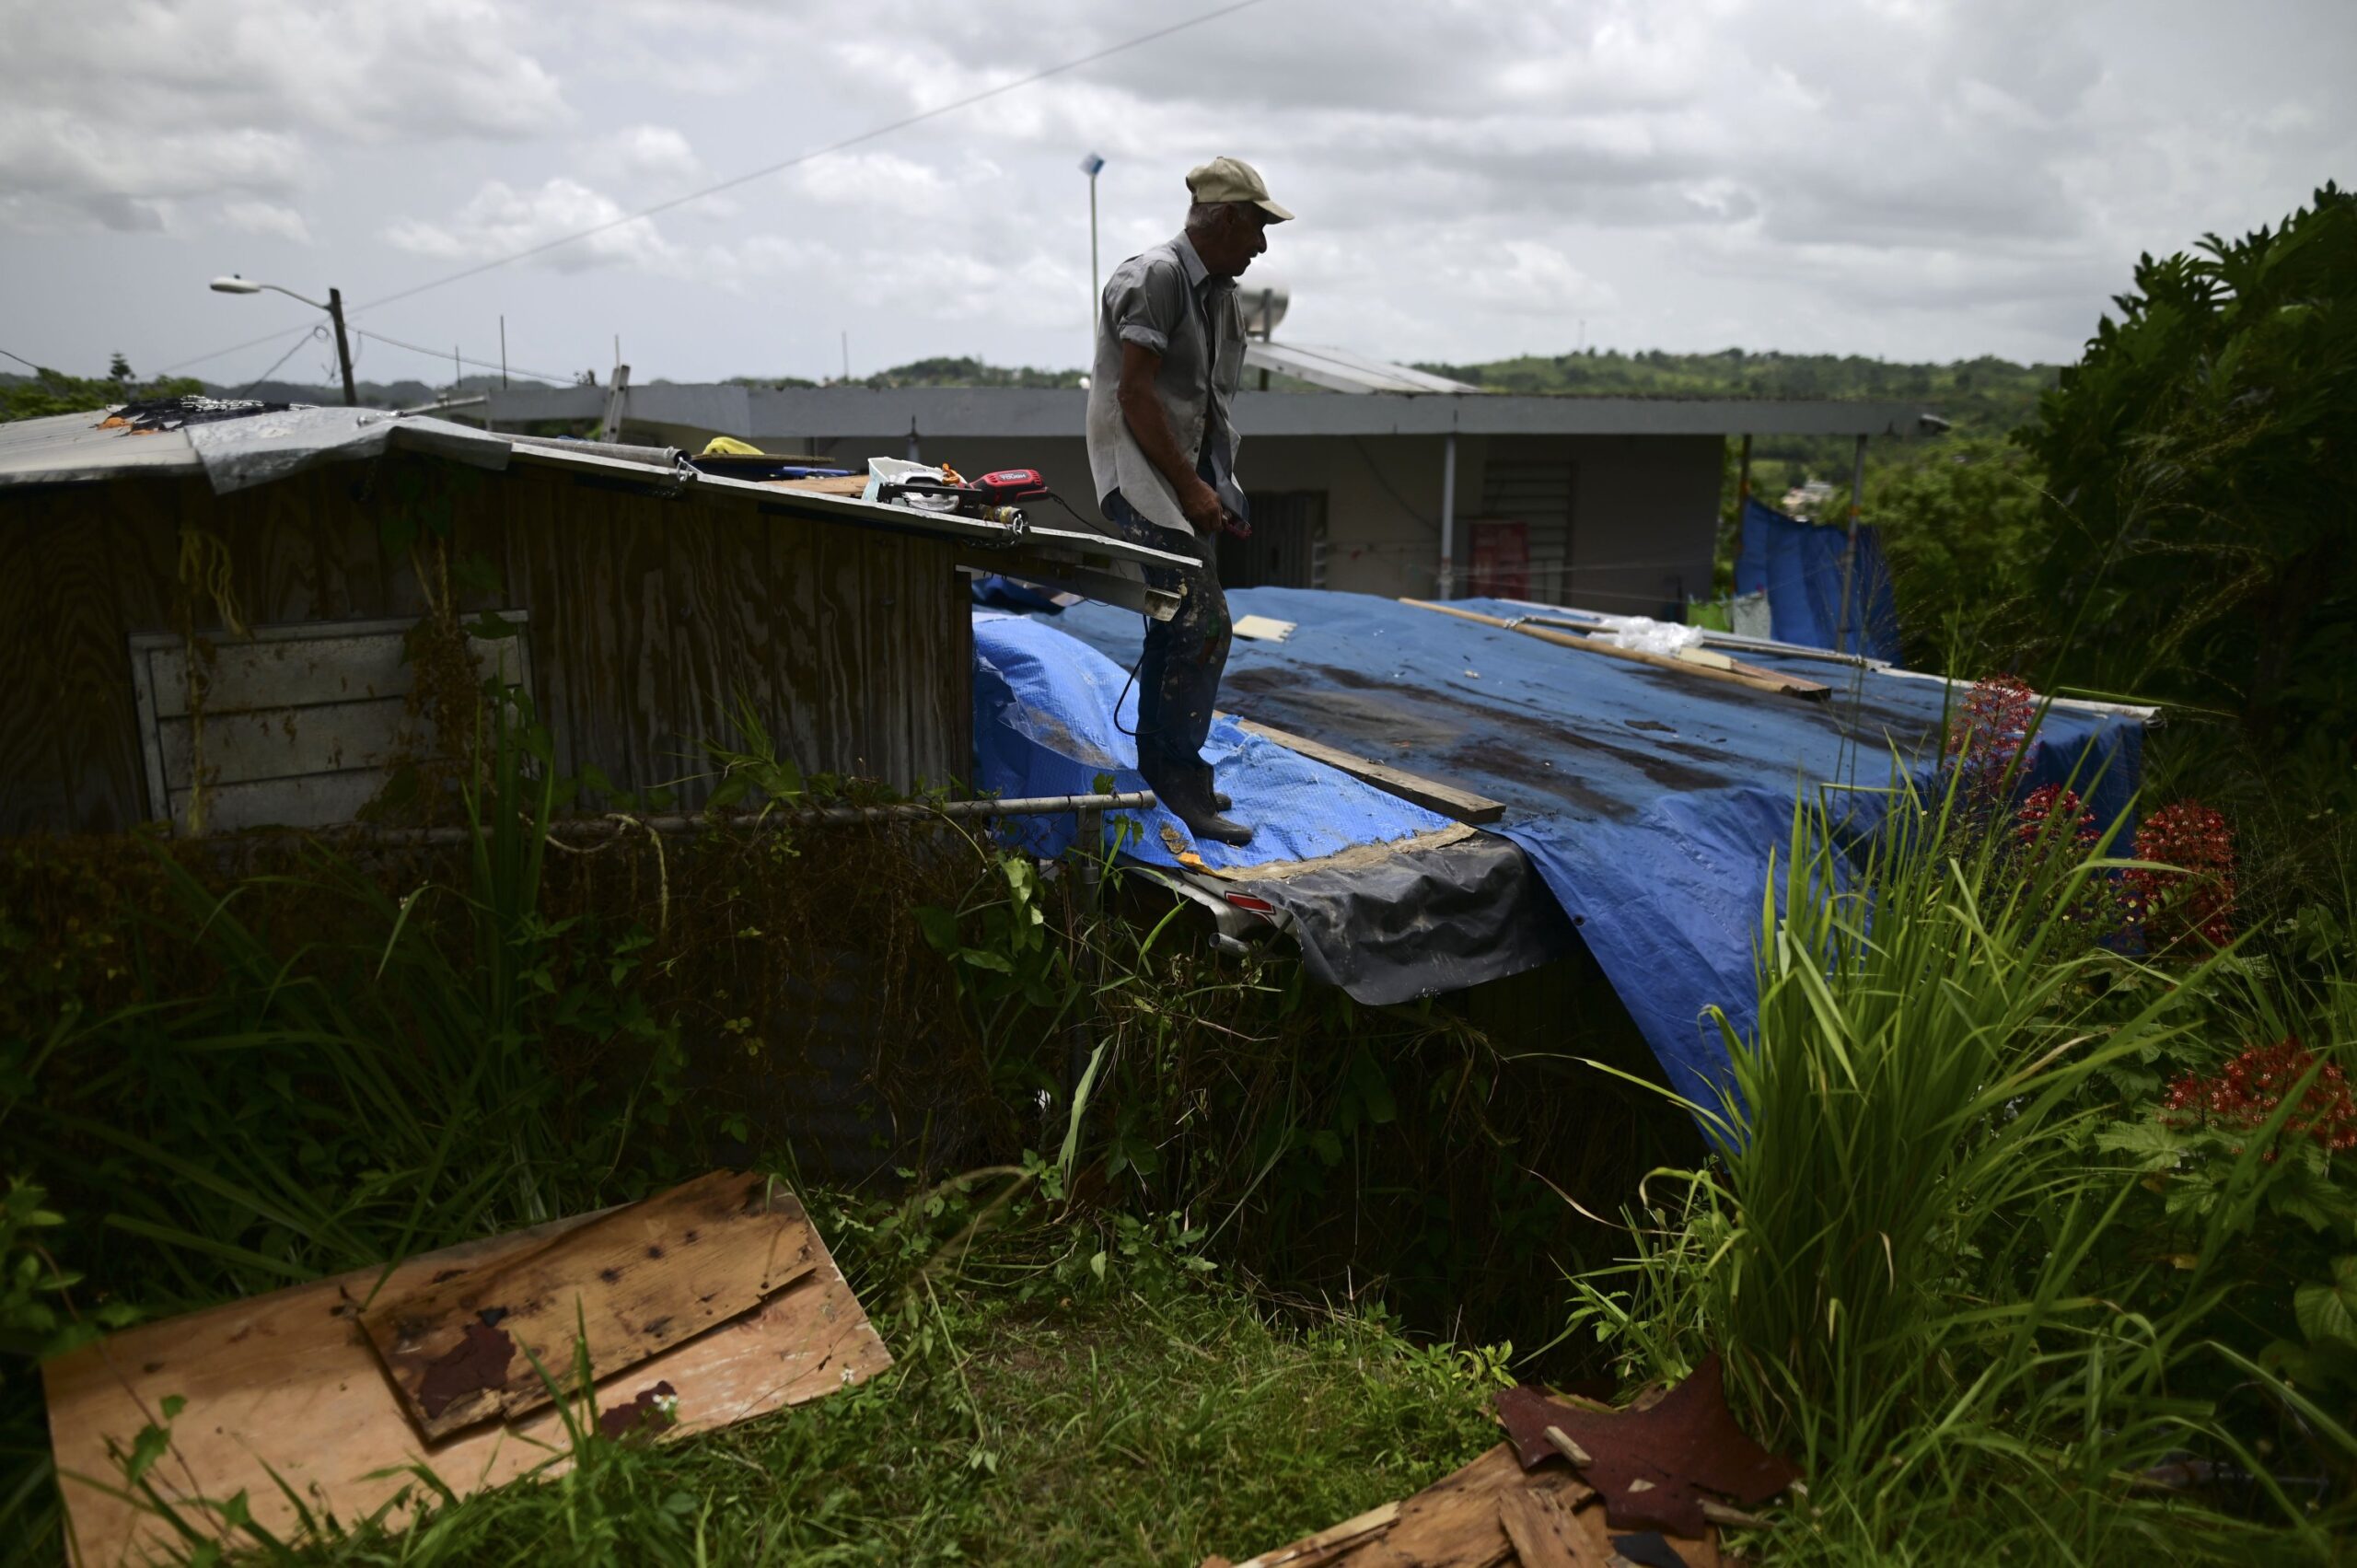 Nearly 3 Years After Hurricane Maria, Some Puerto Ricans Are Just Hoping For A New Blue Tarp